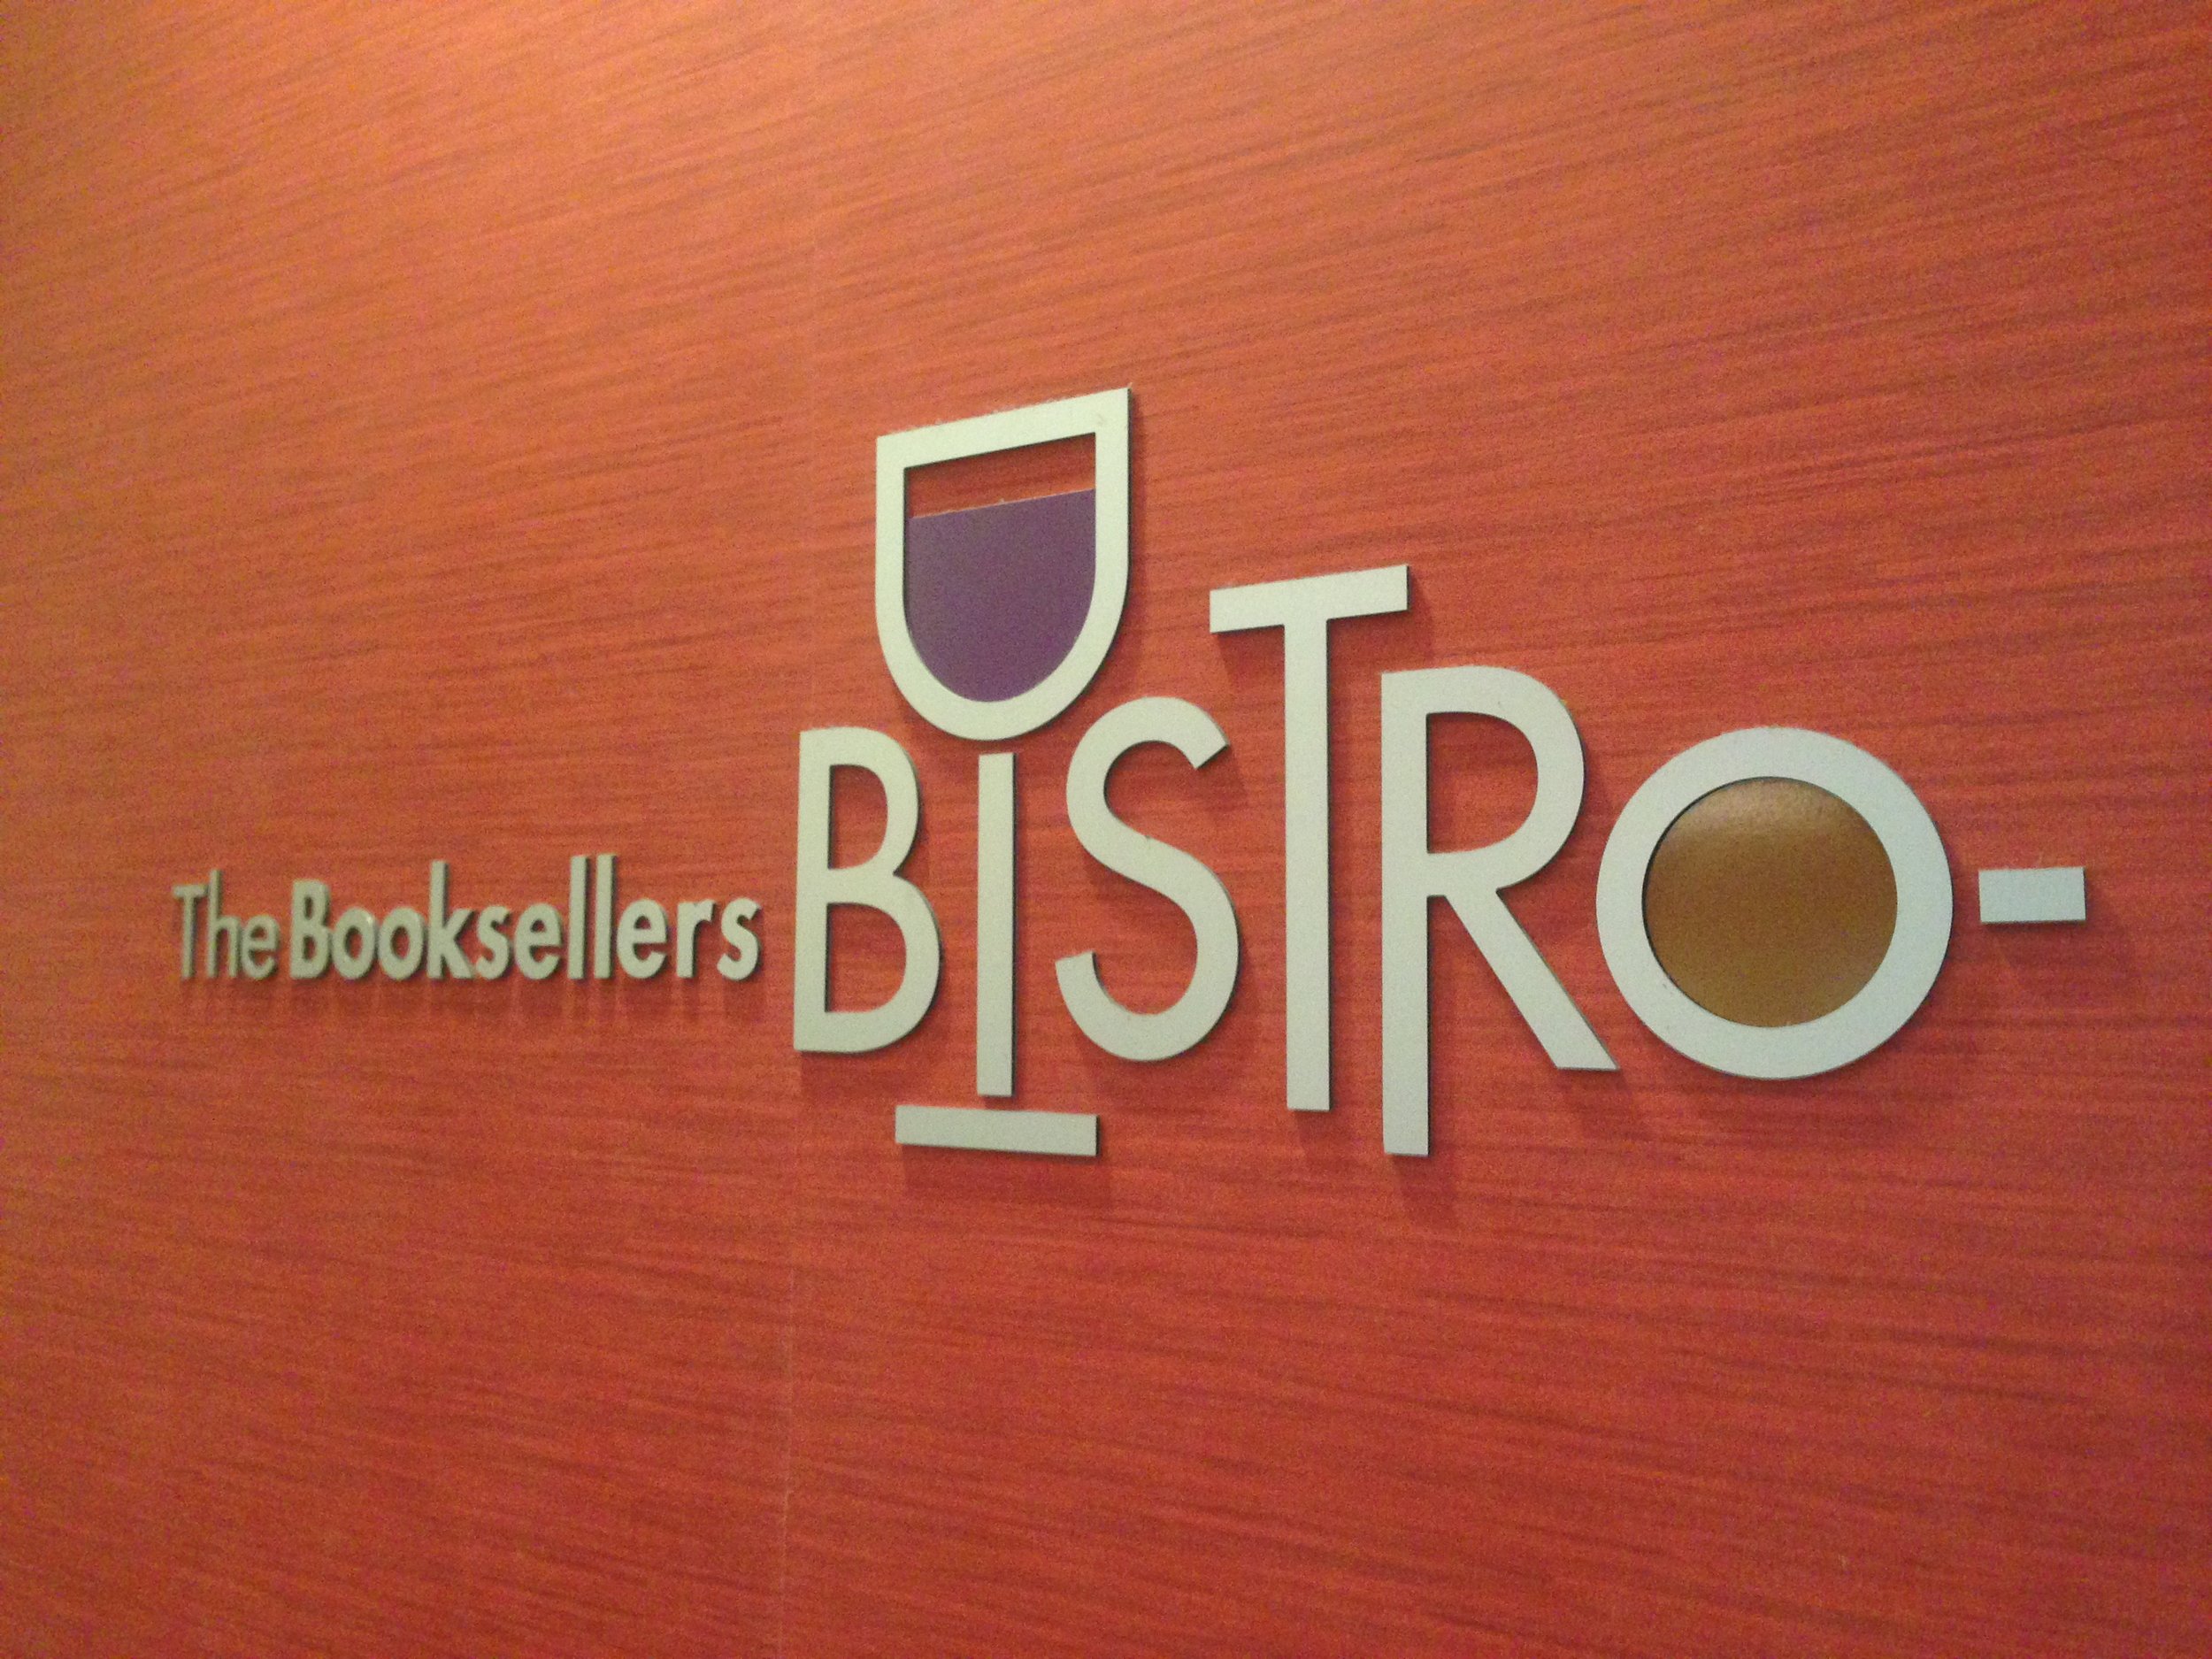  The Booksellers Bistro interior signage  Creative and design by Chuck Mitchell  Laurelwood Center Memphis, Tennessee  Sign fabrication and installation by Frank Balton Sign Company 